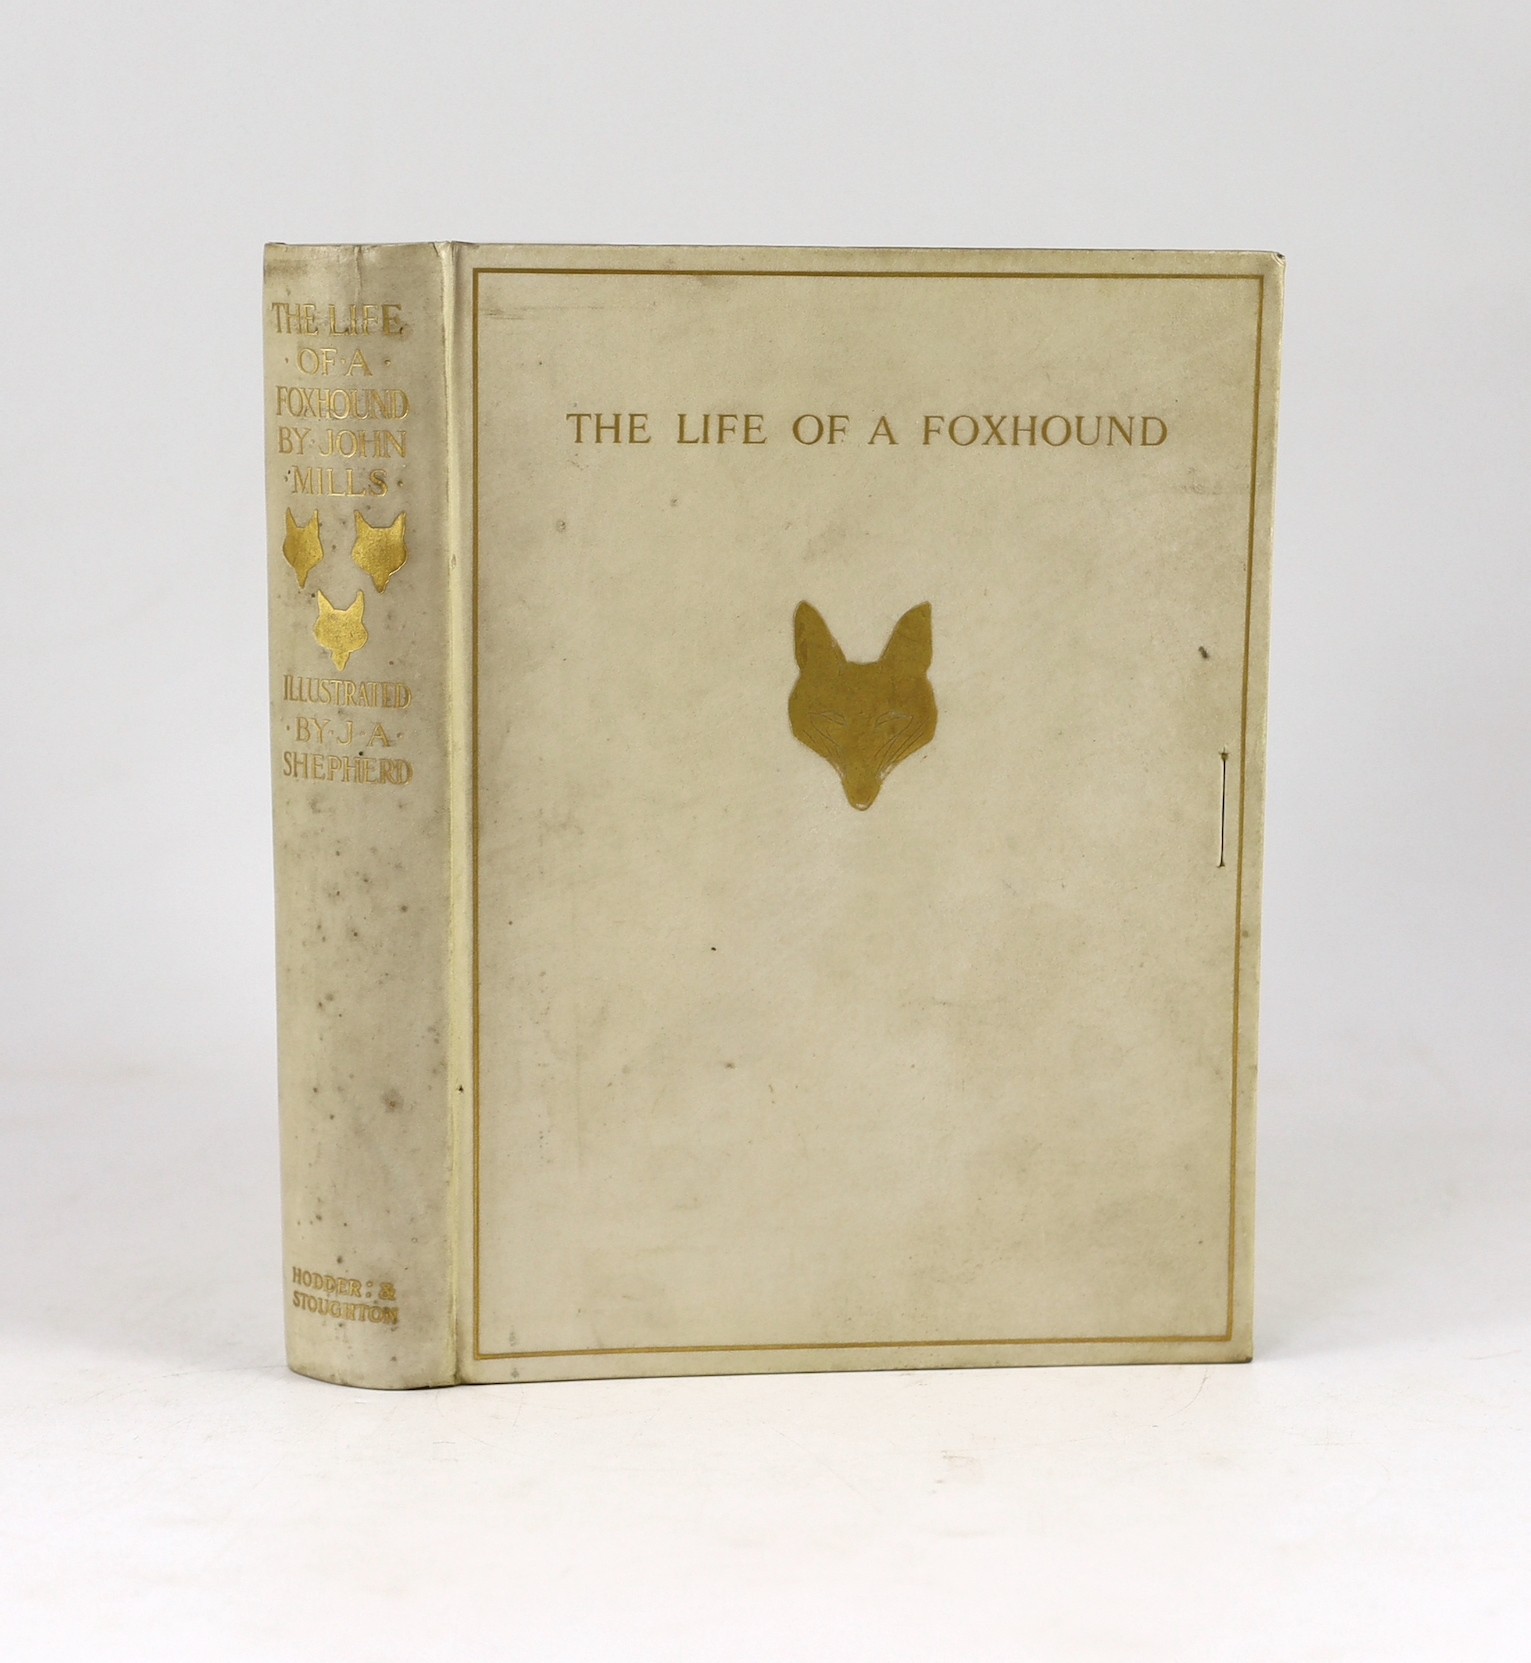 Mills, John - The Life of a Foxhound, illustrated by J.A. Shepherd, 8vo, vellum gilt, with 8 tipped-in colour plates, Hodder and Stoughton, London, c. 1921 and Partridge, John - Merlinus Liberatus: Being and Almanack for